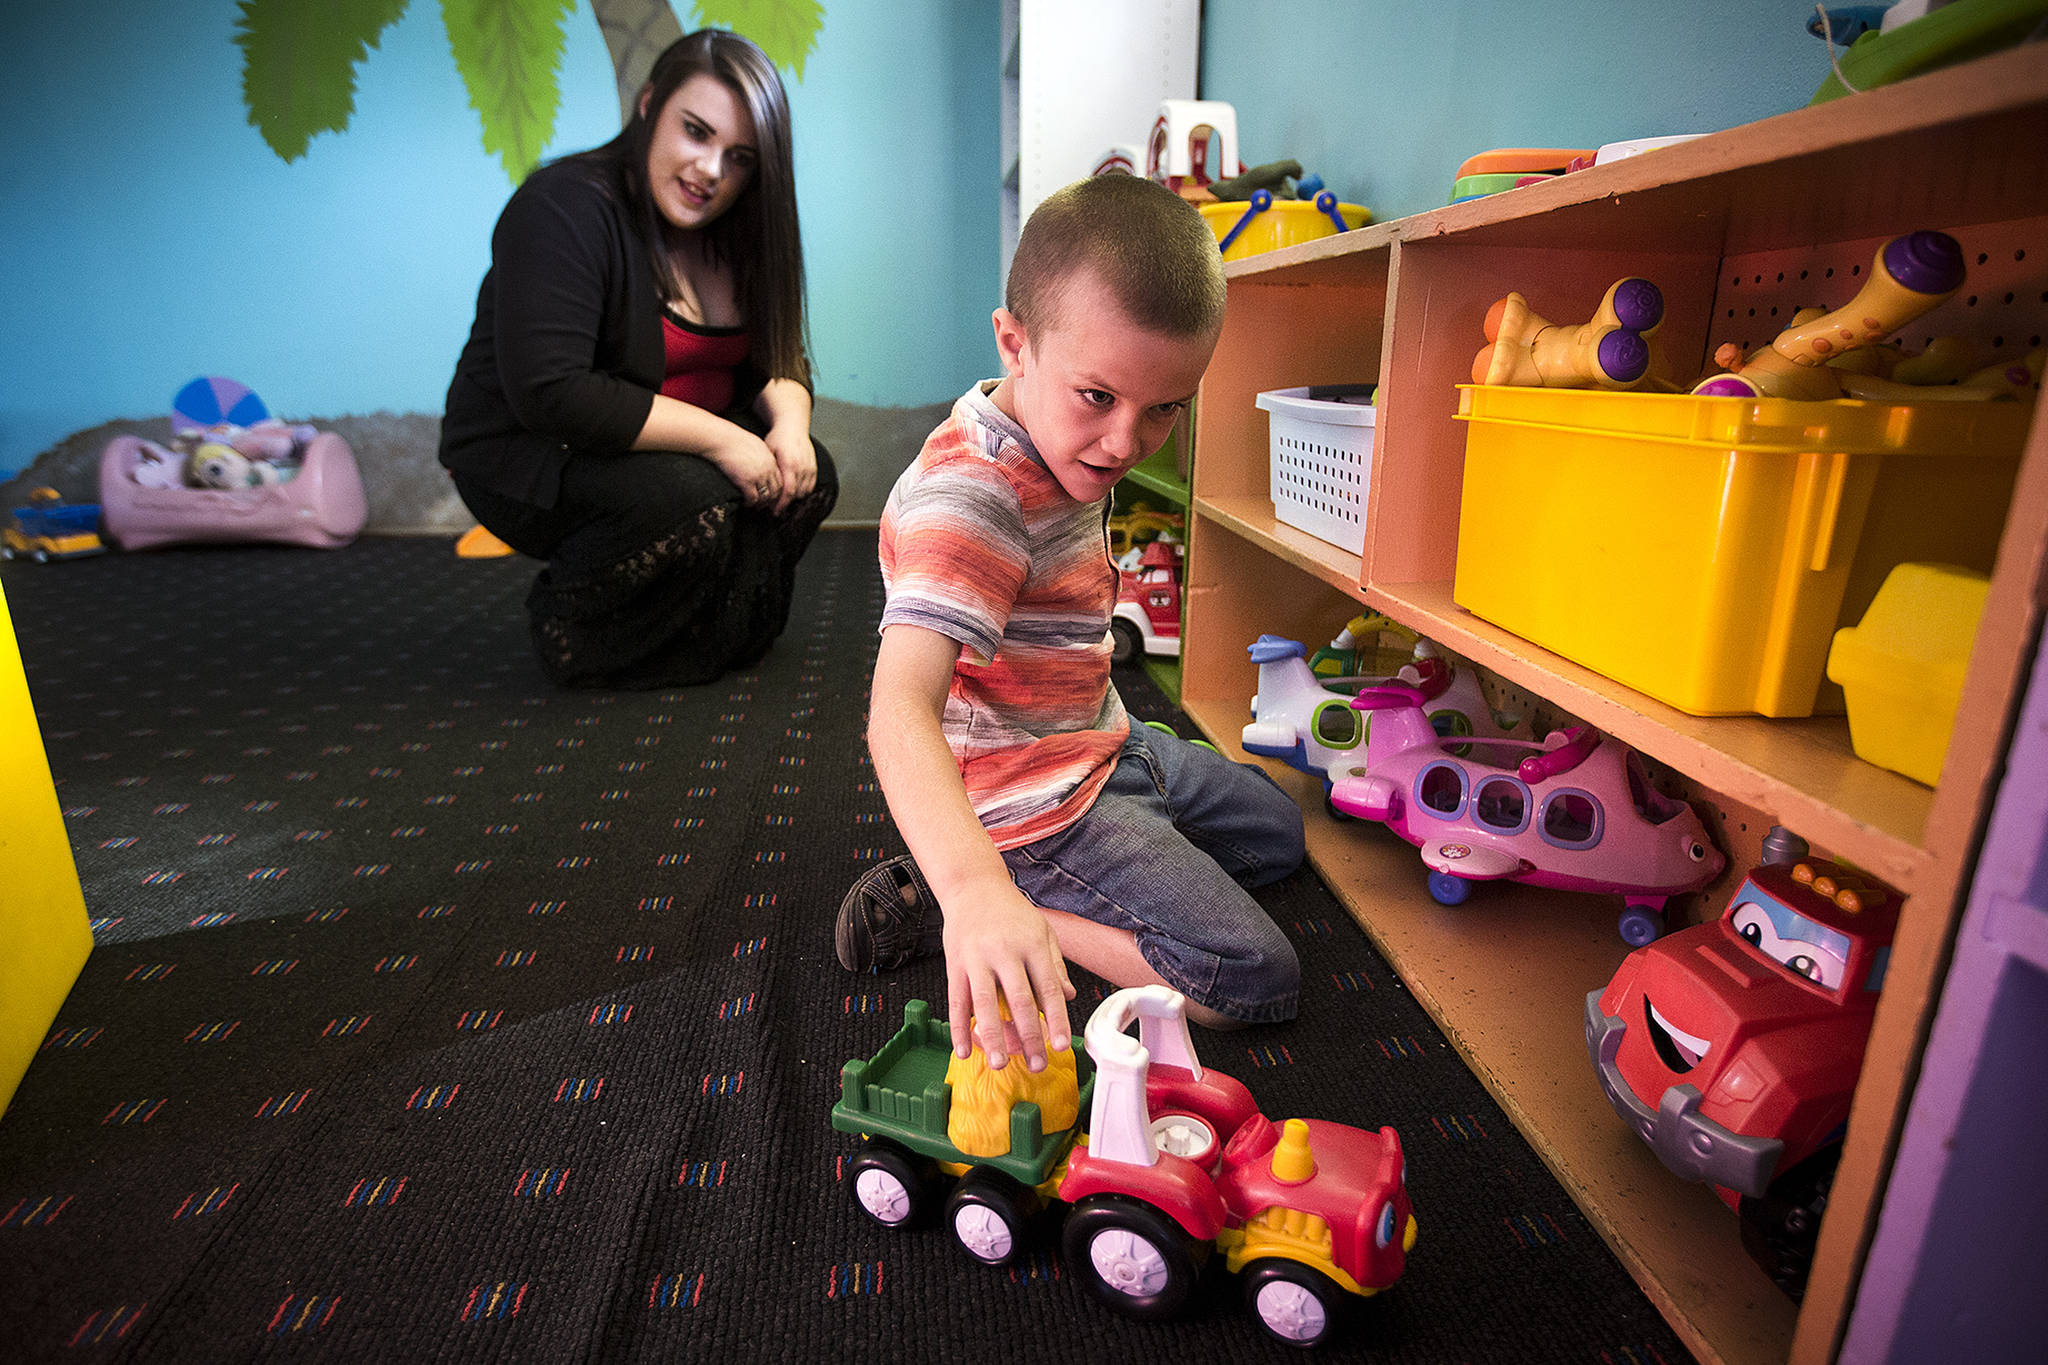 Joshua Latimer, 7, plays at Another Best Child Care in Everett while his mother, Leigh Anne Latimer, watches last September. (Ian Terry / The Herald)